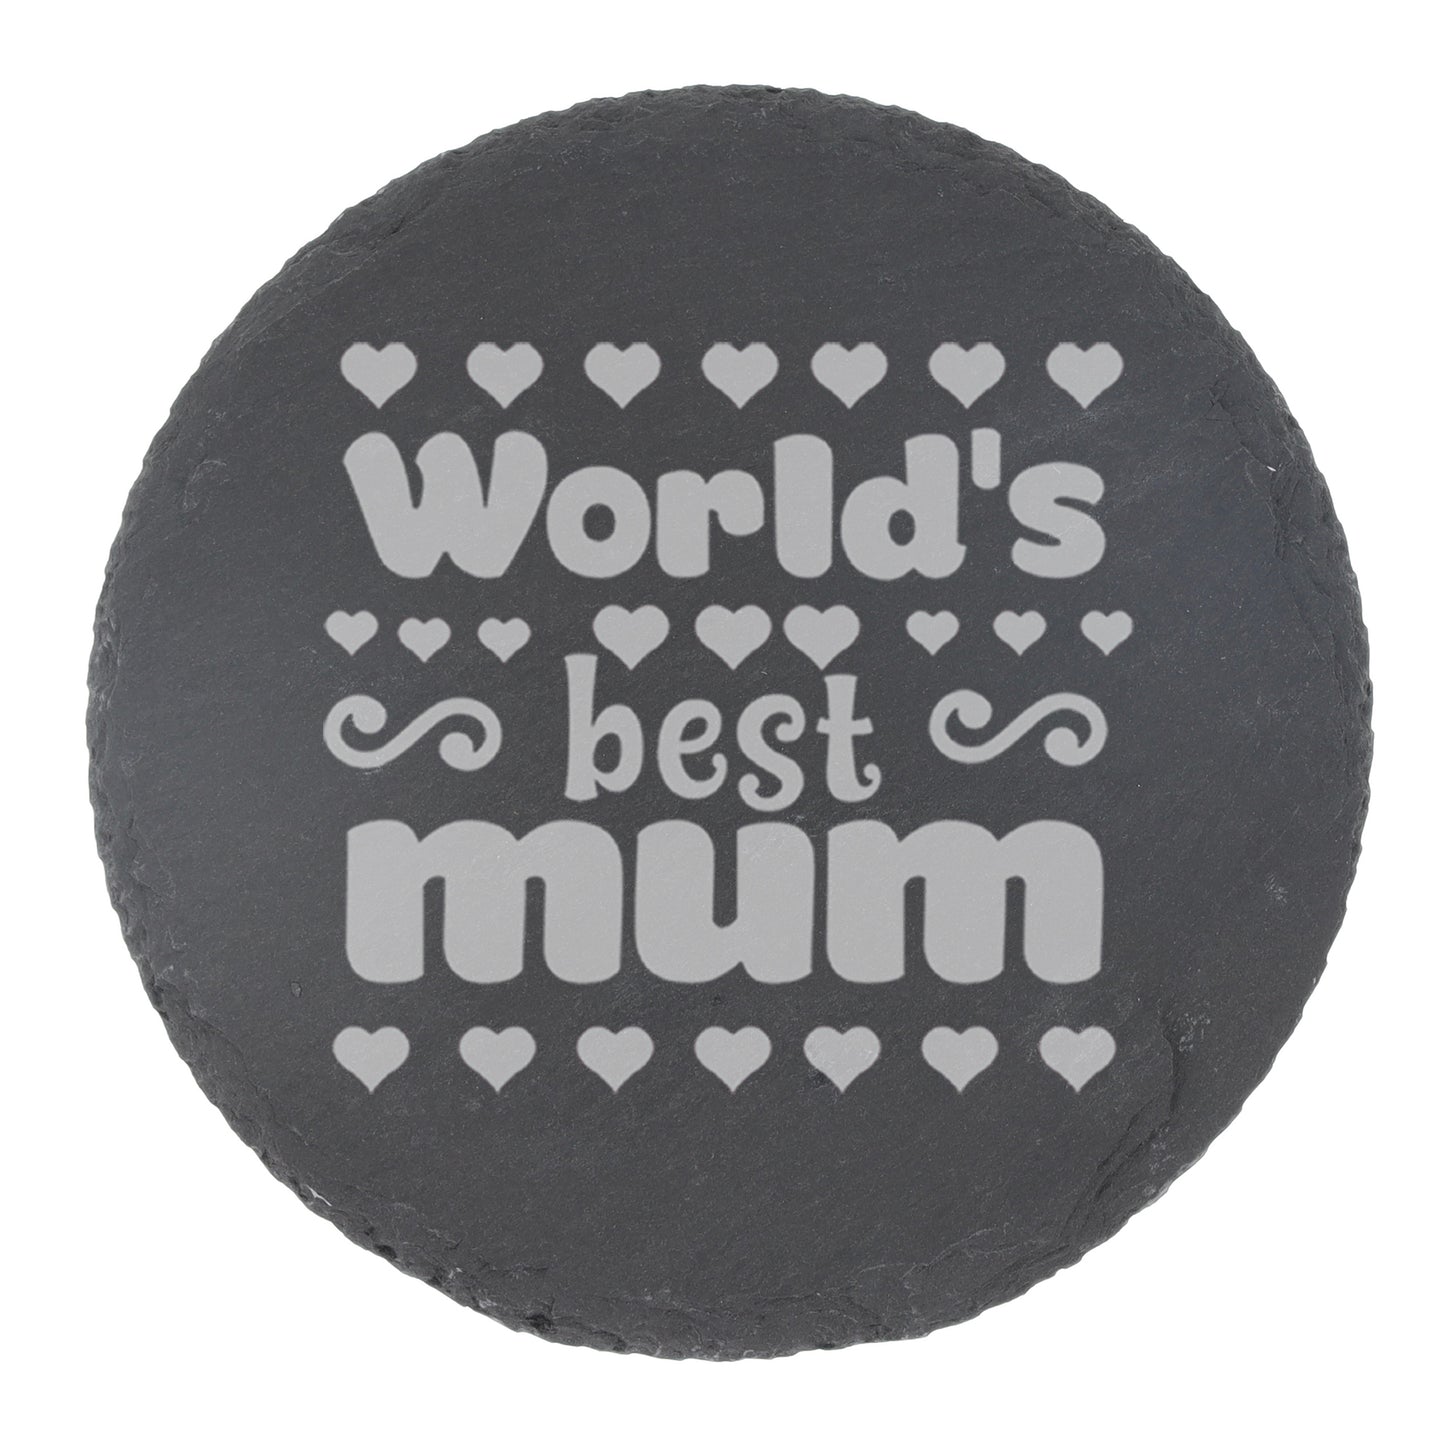 Worlds Best Mum Engraved Beer Glass and/or Coaster Set  - Always Looking Good -   